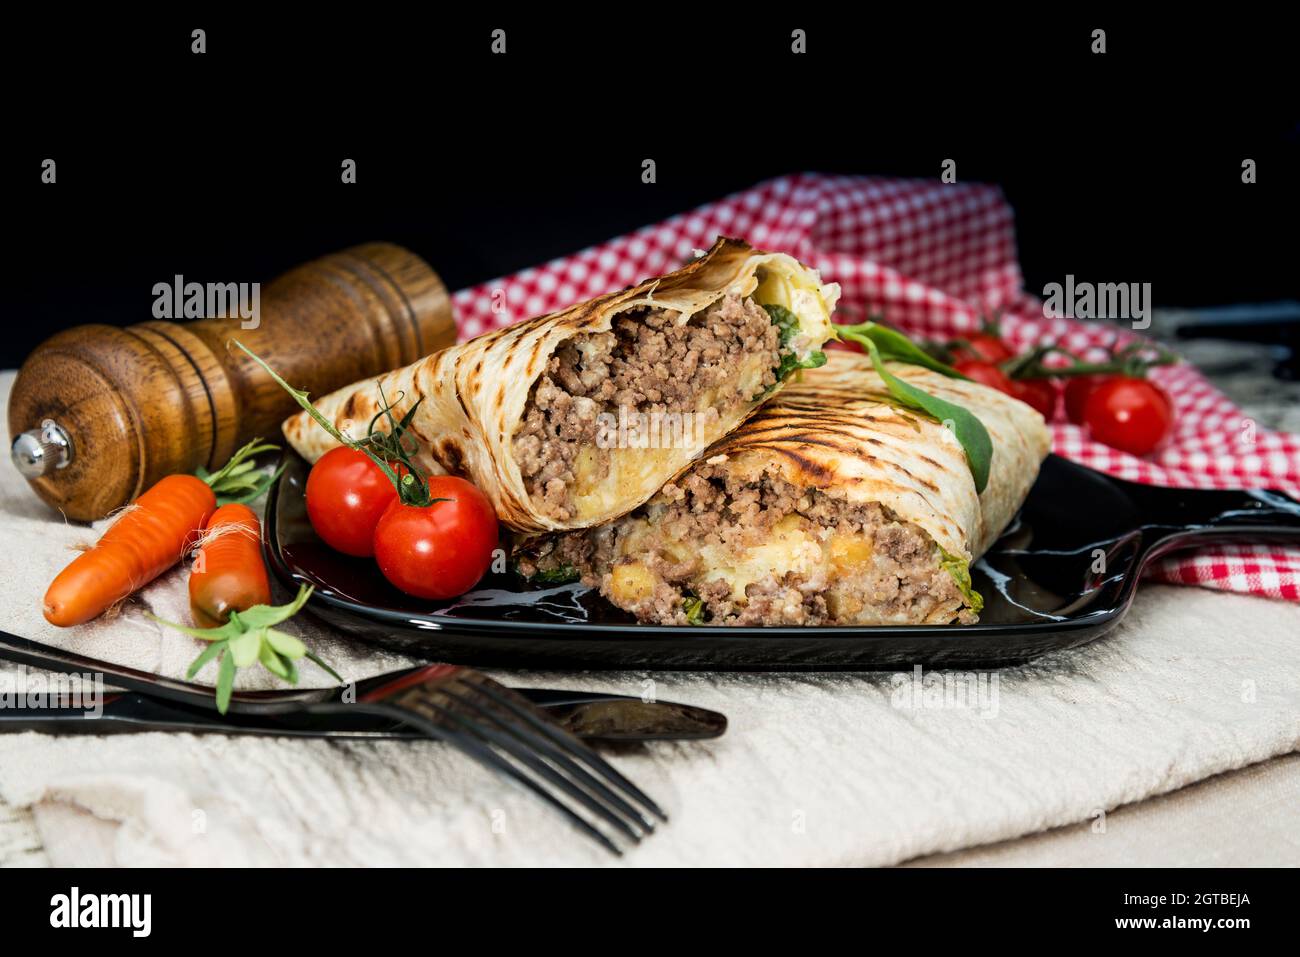 Close-up Of Stuffed Food In Plate On Table Stock Photo